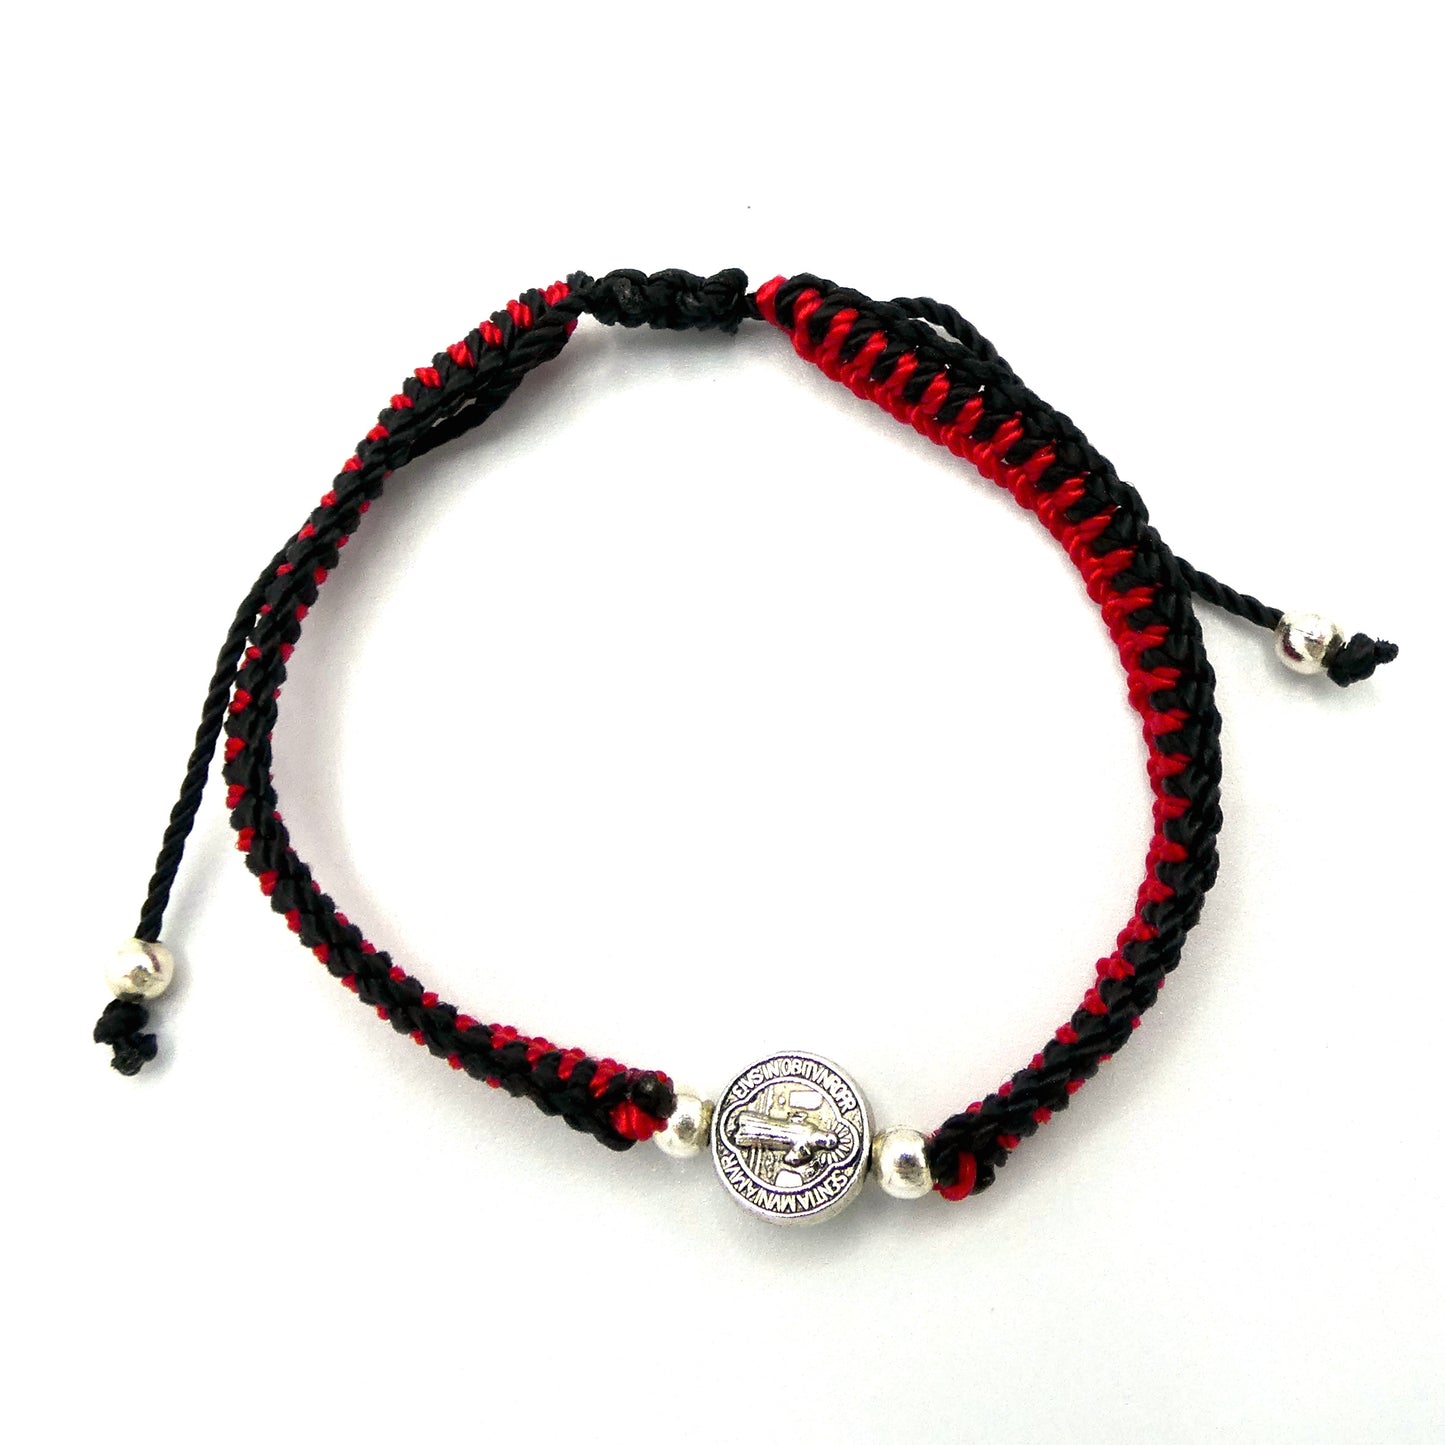 Braided Bracelet of Assorted Colors with St. Benedict Medal